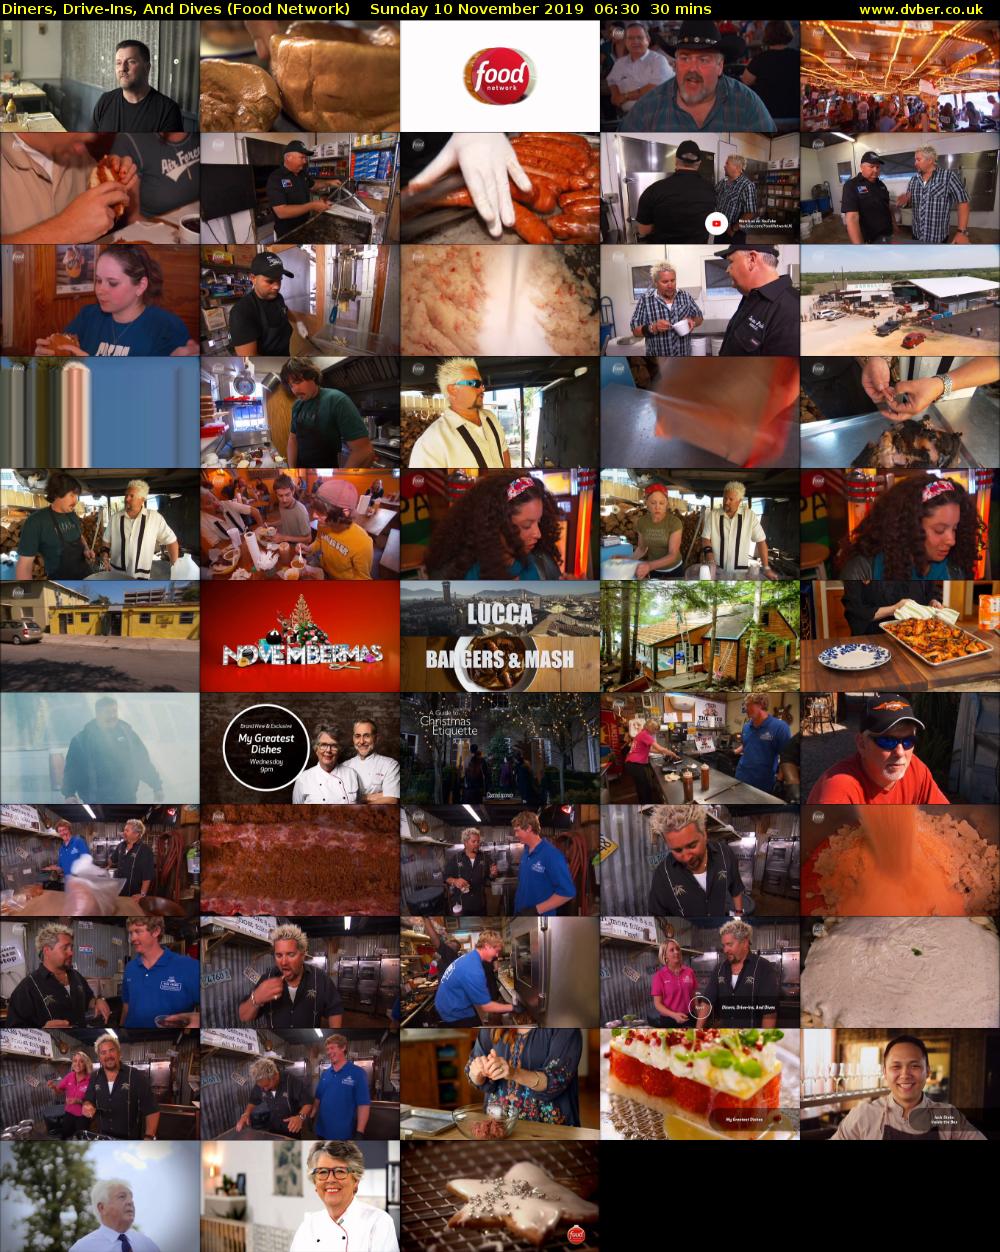 Diners, Drive-Ins, And Dives (Food Network) Sunday 10 November 2019 06:30 - 07:00